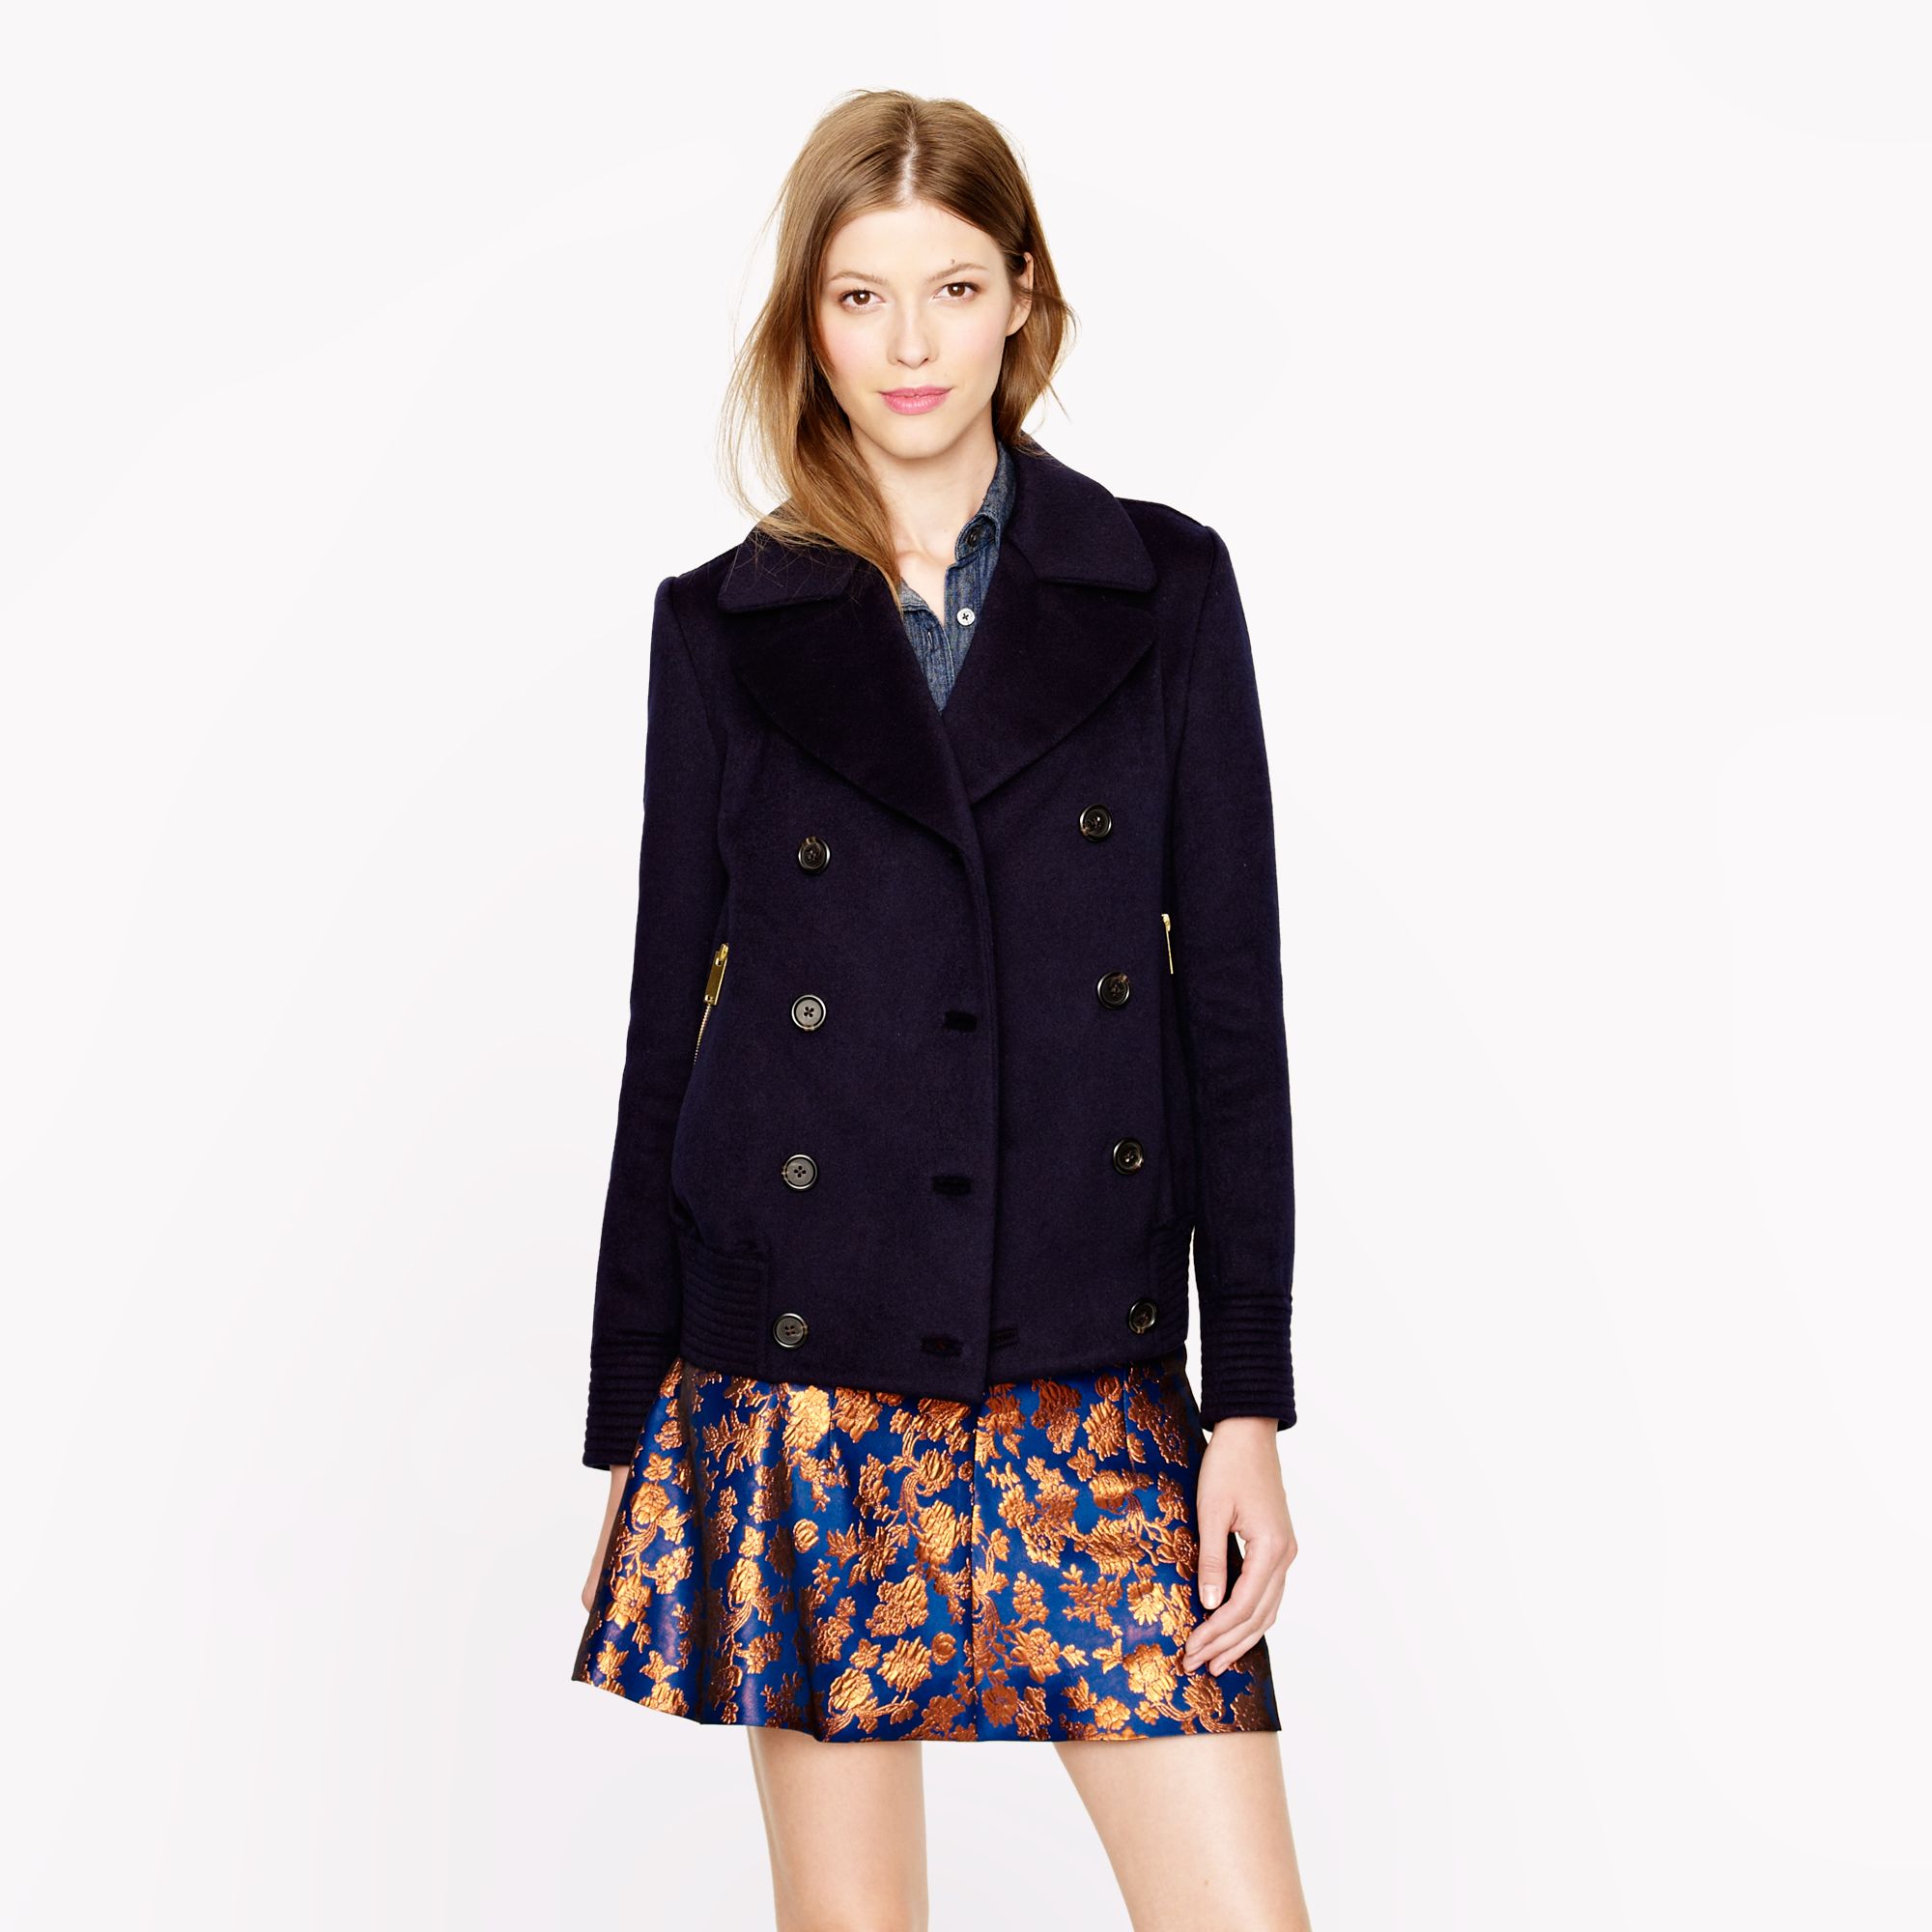 Lyst - J.Crew Collection Cashmere Bomber Peacoat in Blue